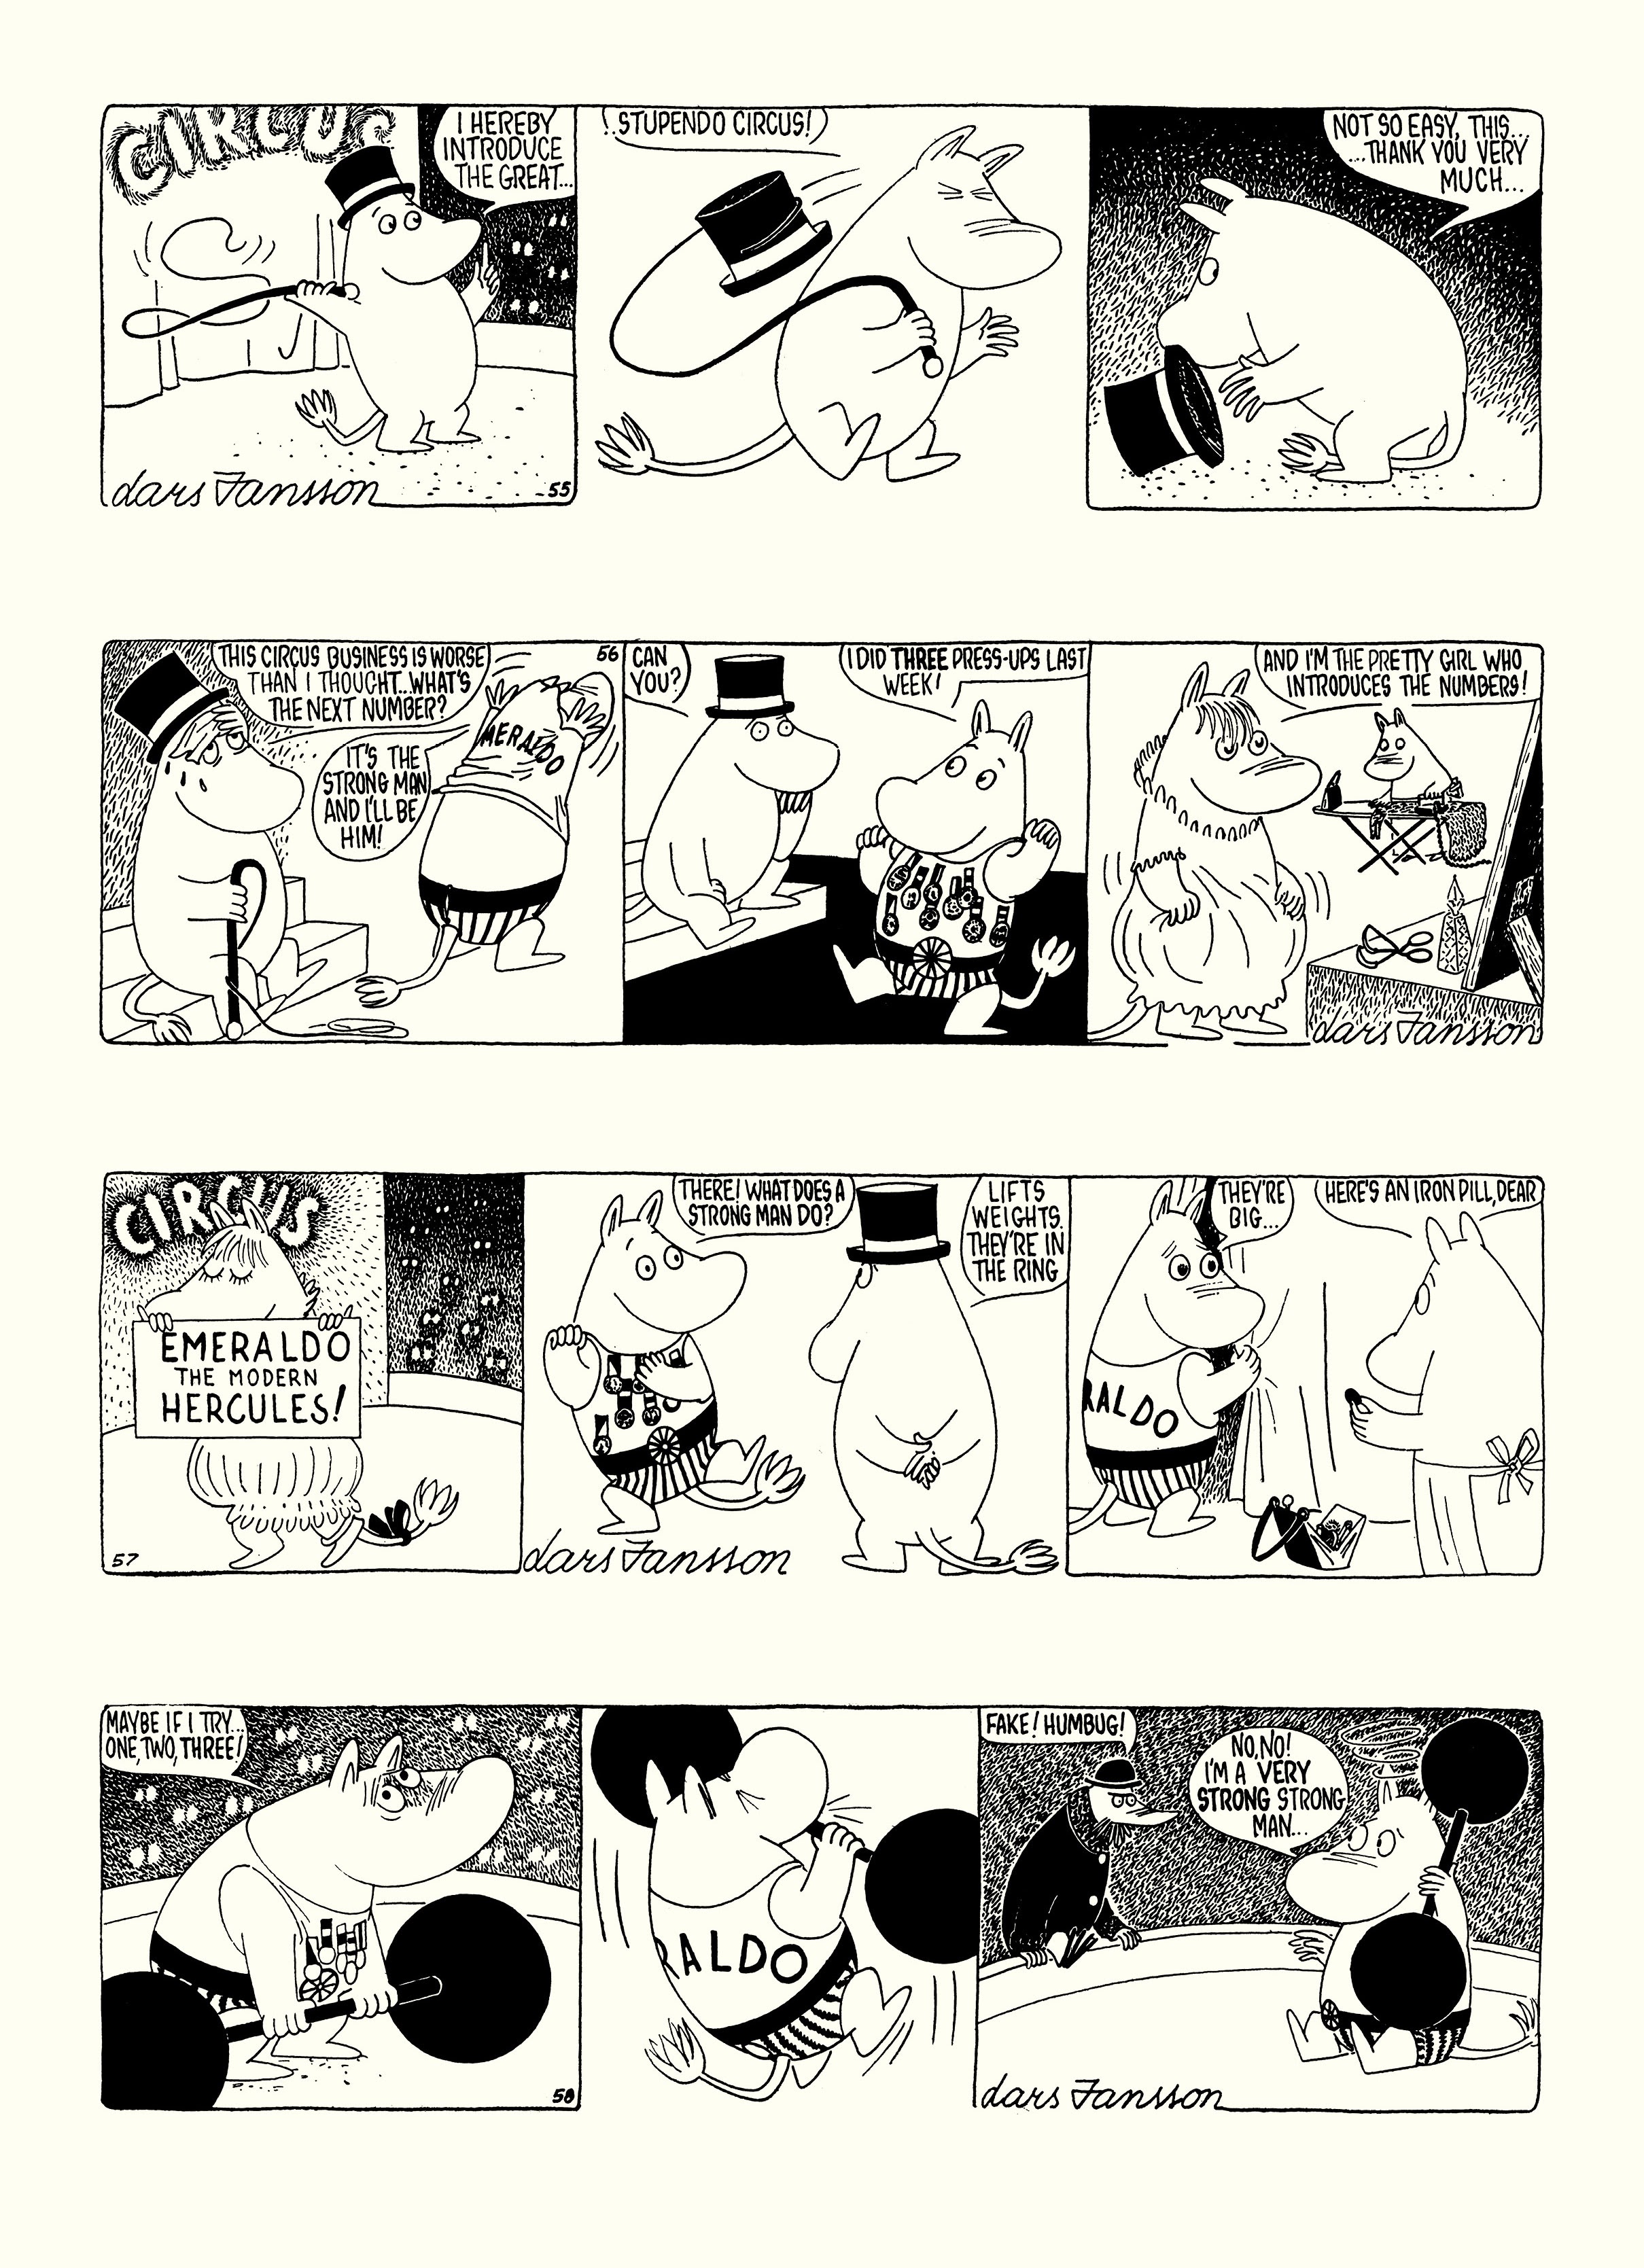 Read online Moomin: The Complete Lars Jansson Comic Strip comic -  Issue # TPB 6 - 82